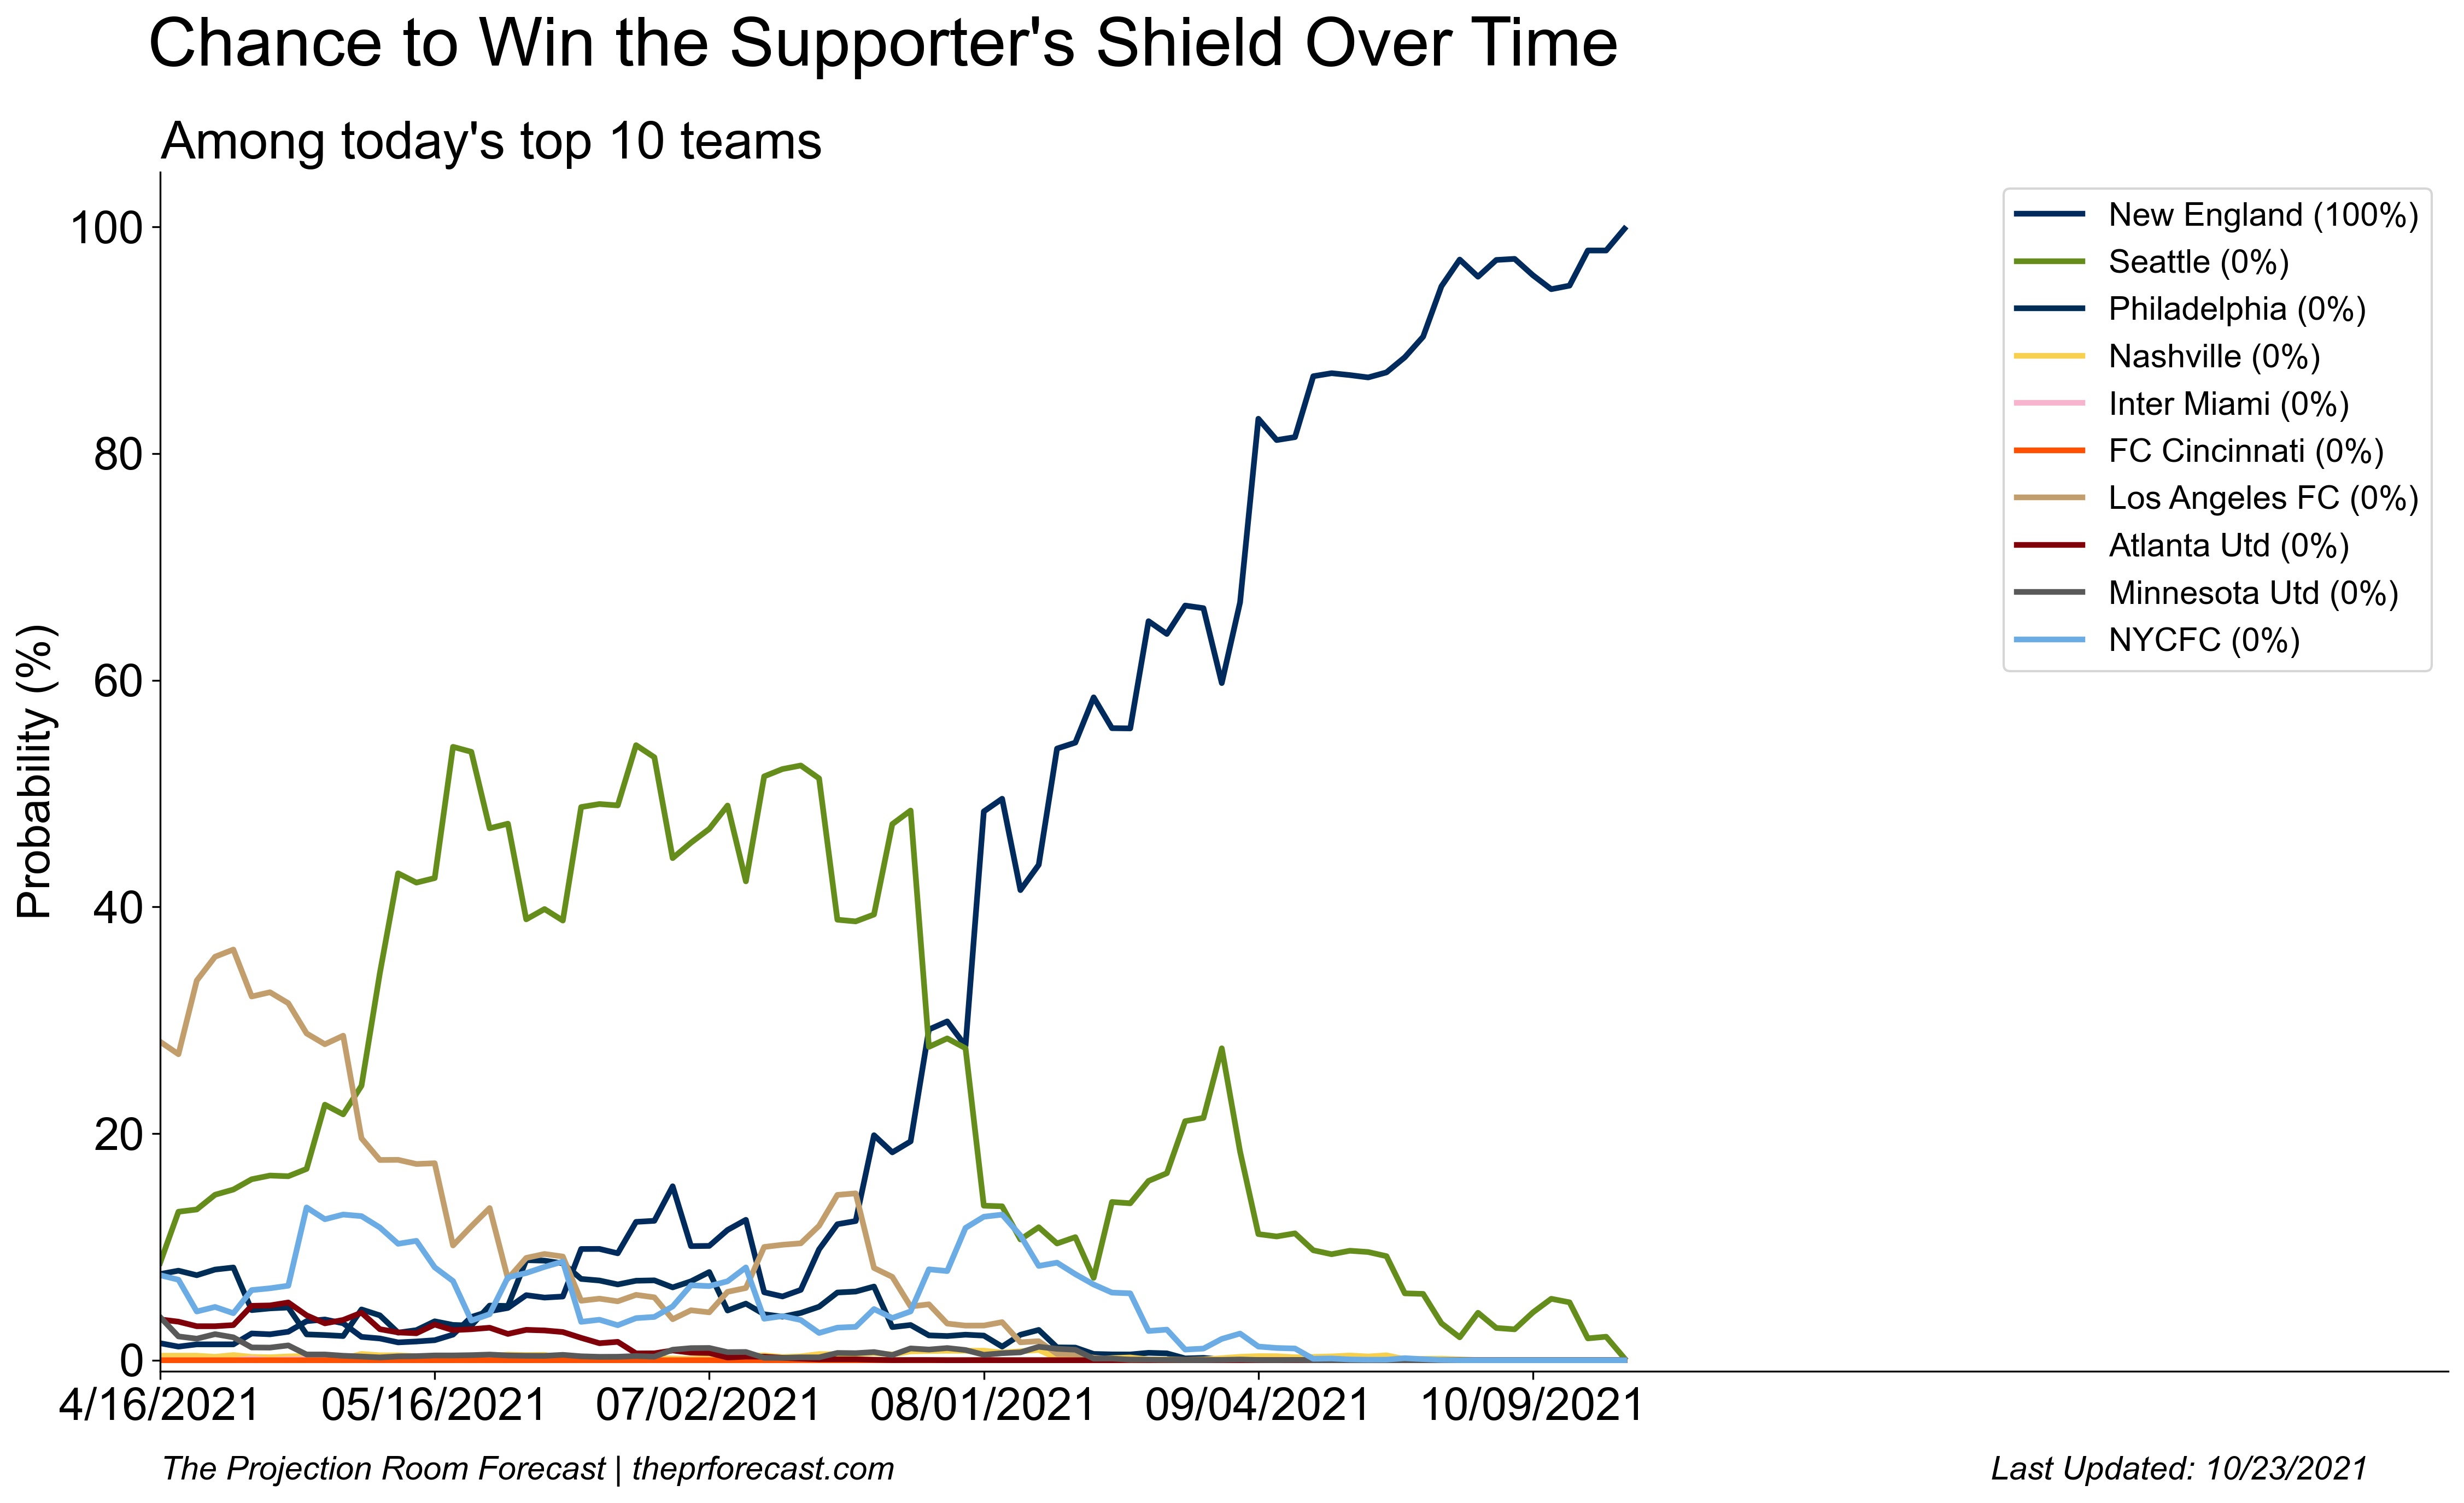 Chance to Win Supporters' Shield Over Time